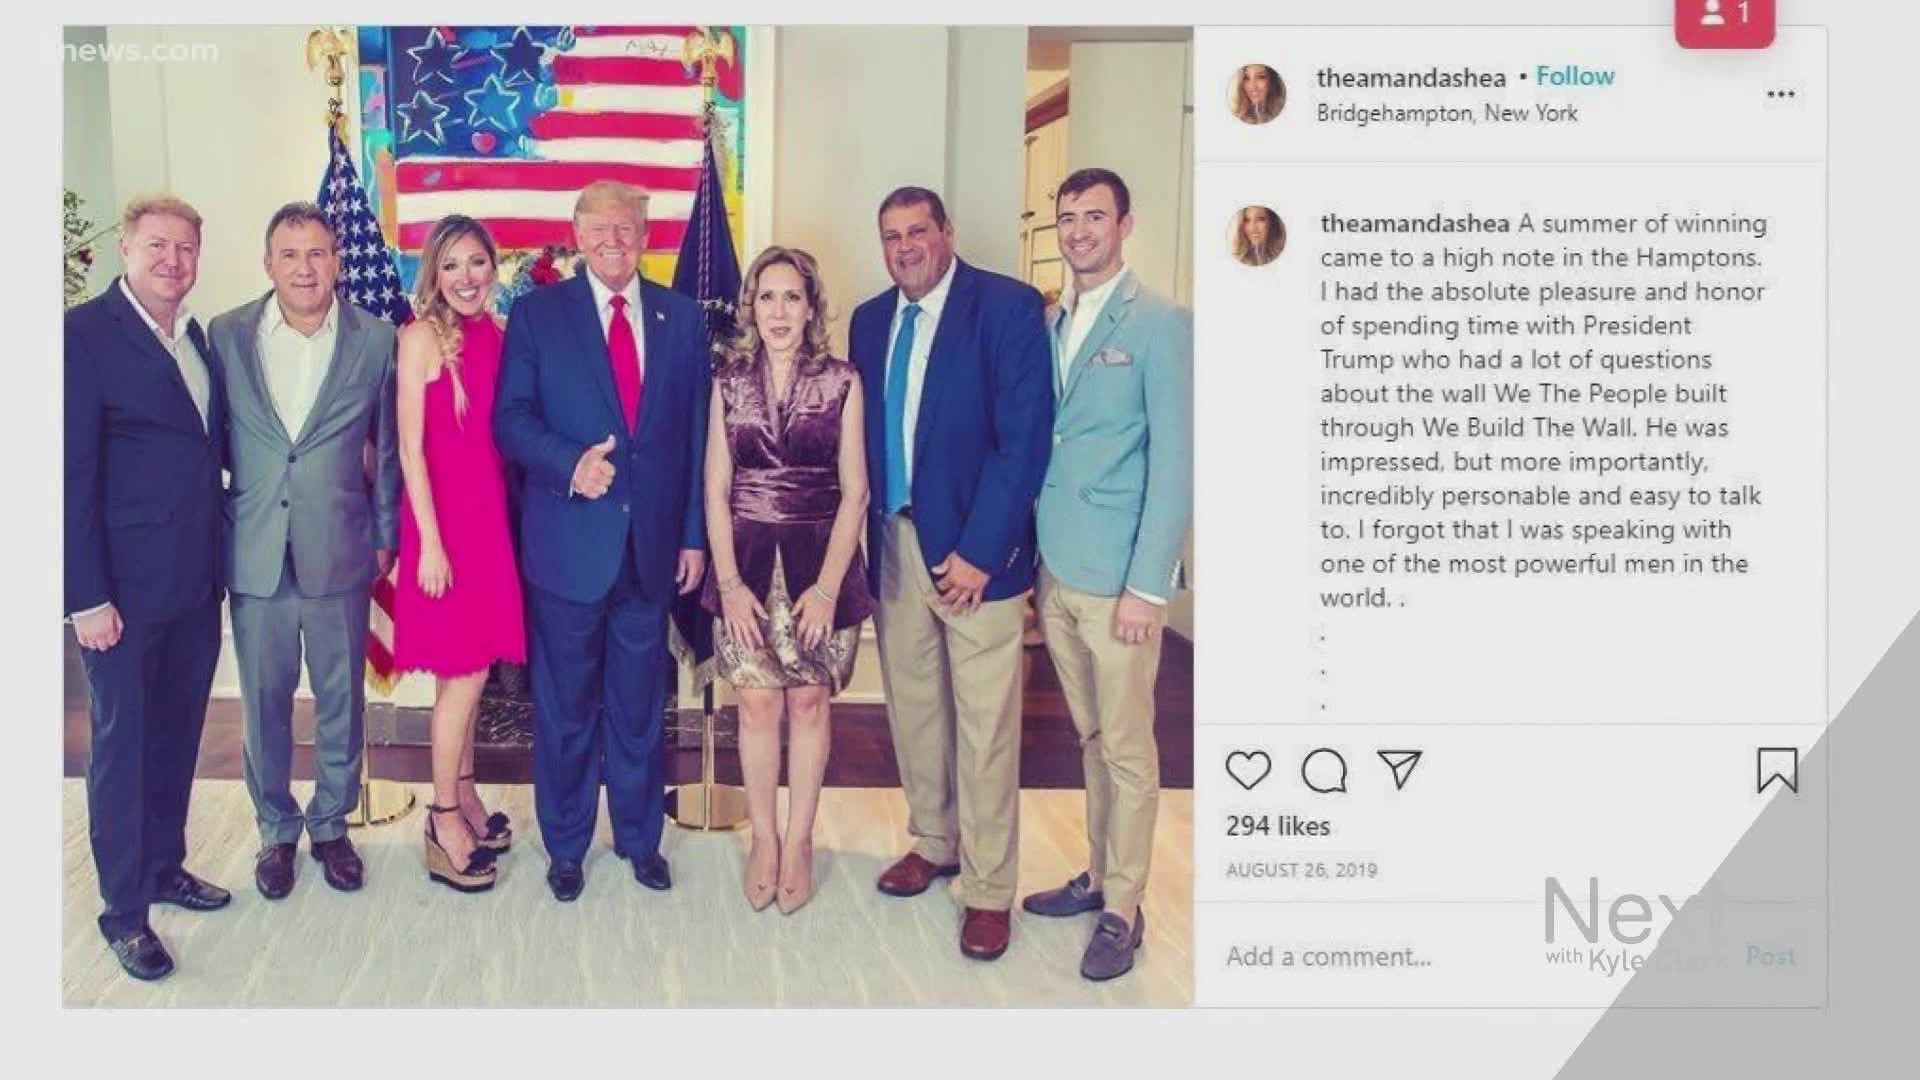 Amanda Shea, Chief Financial Officer of We Build the Wall, posted a photo with the President almost one year before the recent indictments.